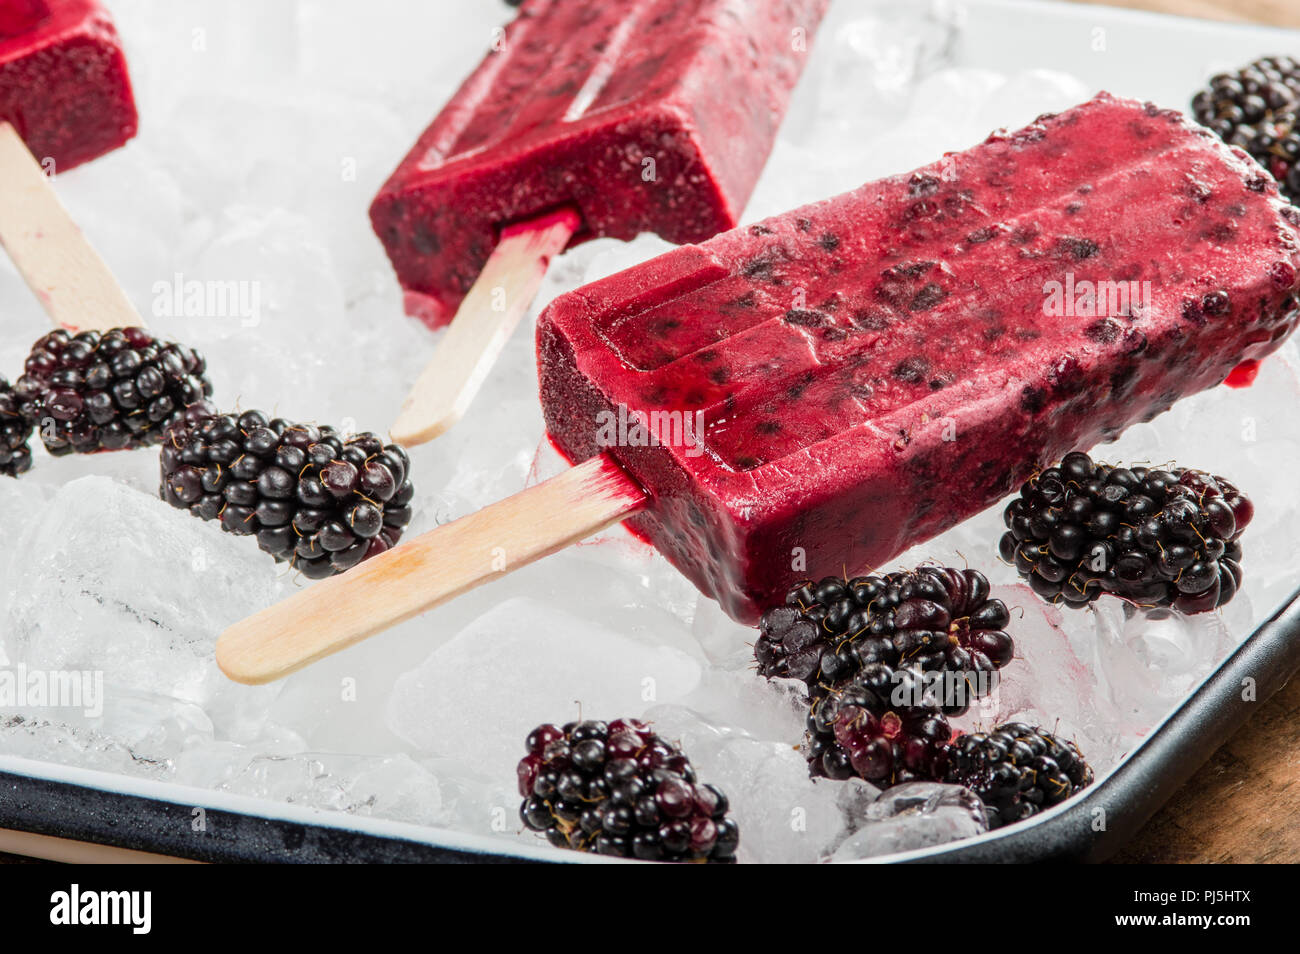 Frozen blackberry pops with berries on tray of ice Stock Photo